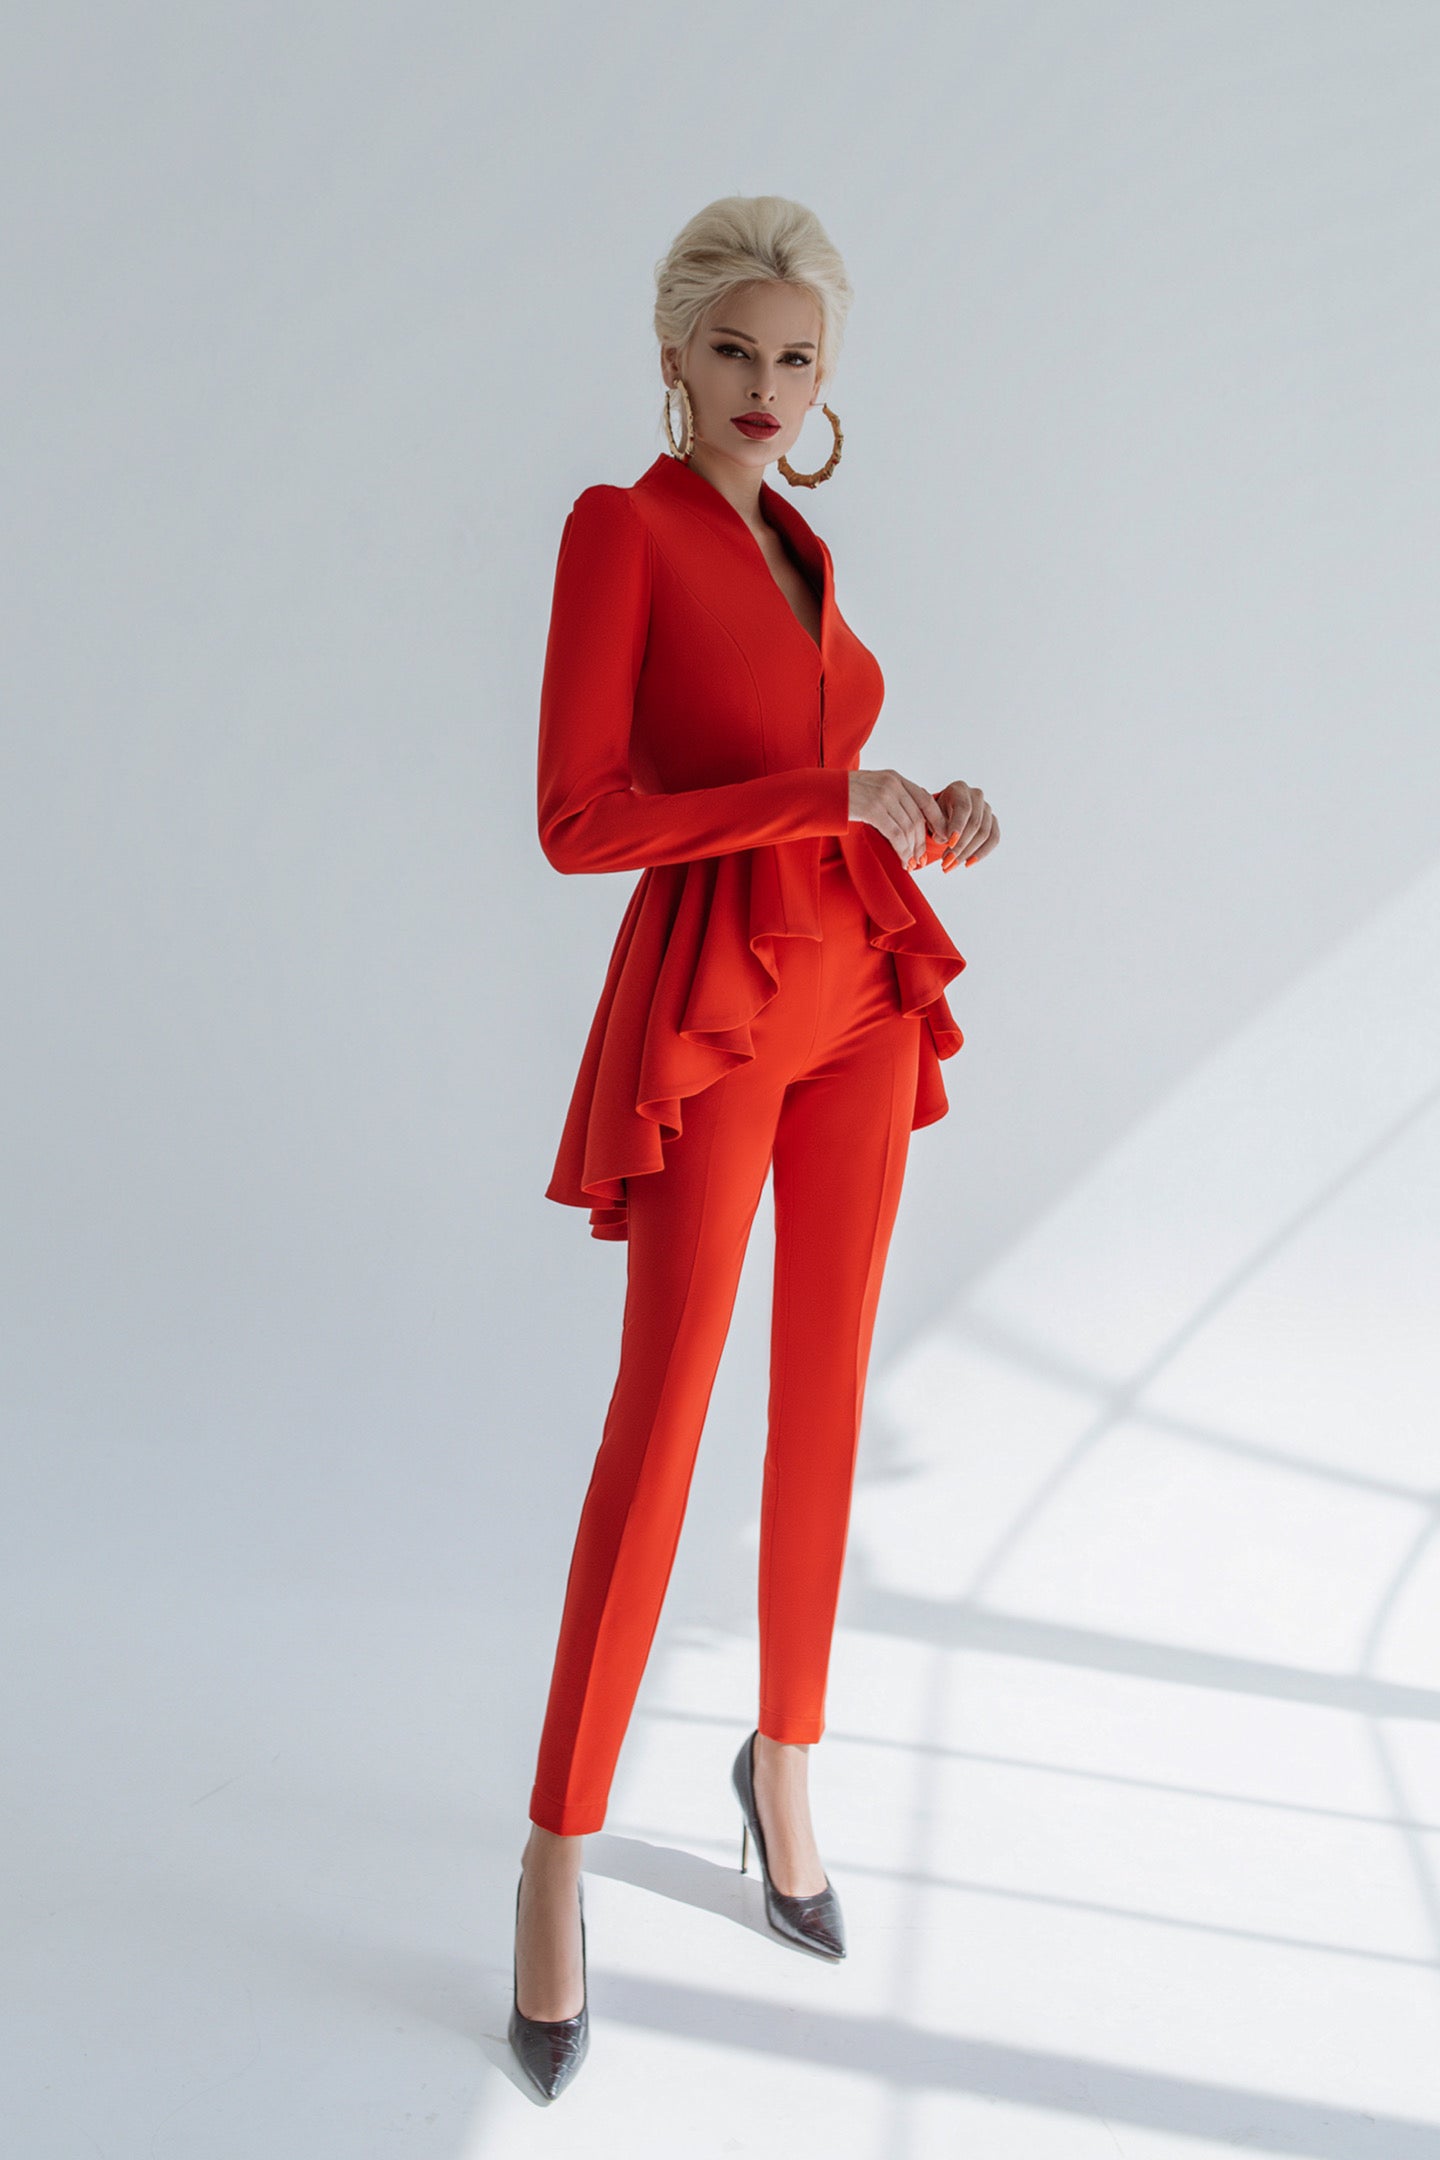 Red Pantsuit With Peplum Blazer for Women, Red Chic Pantsuit for